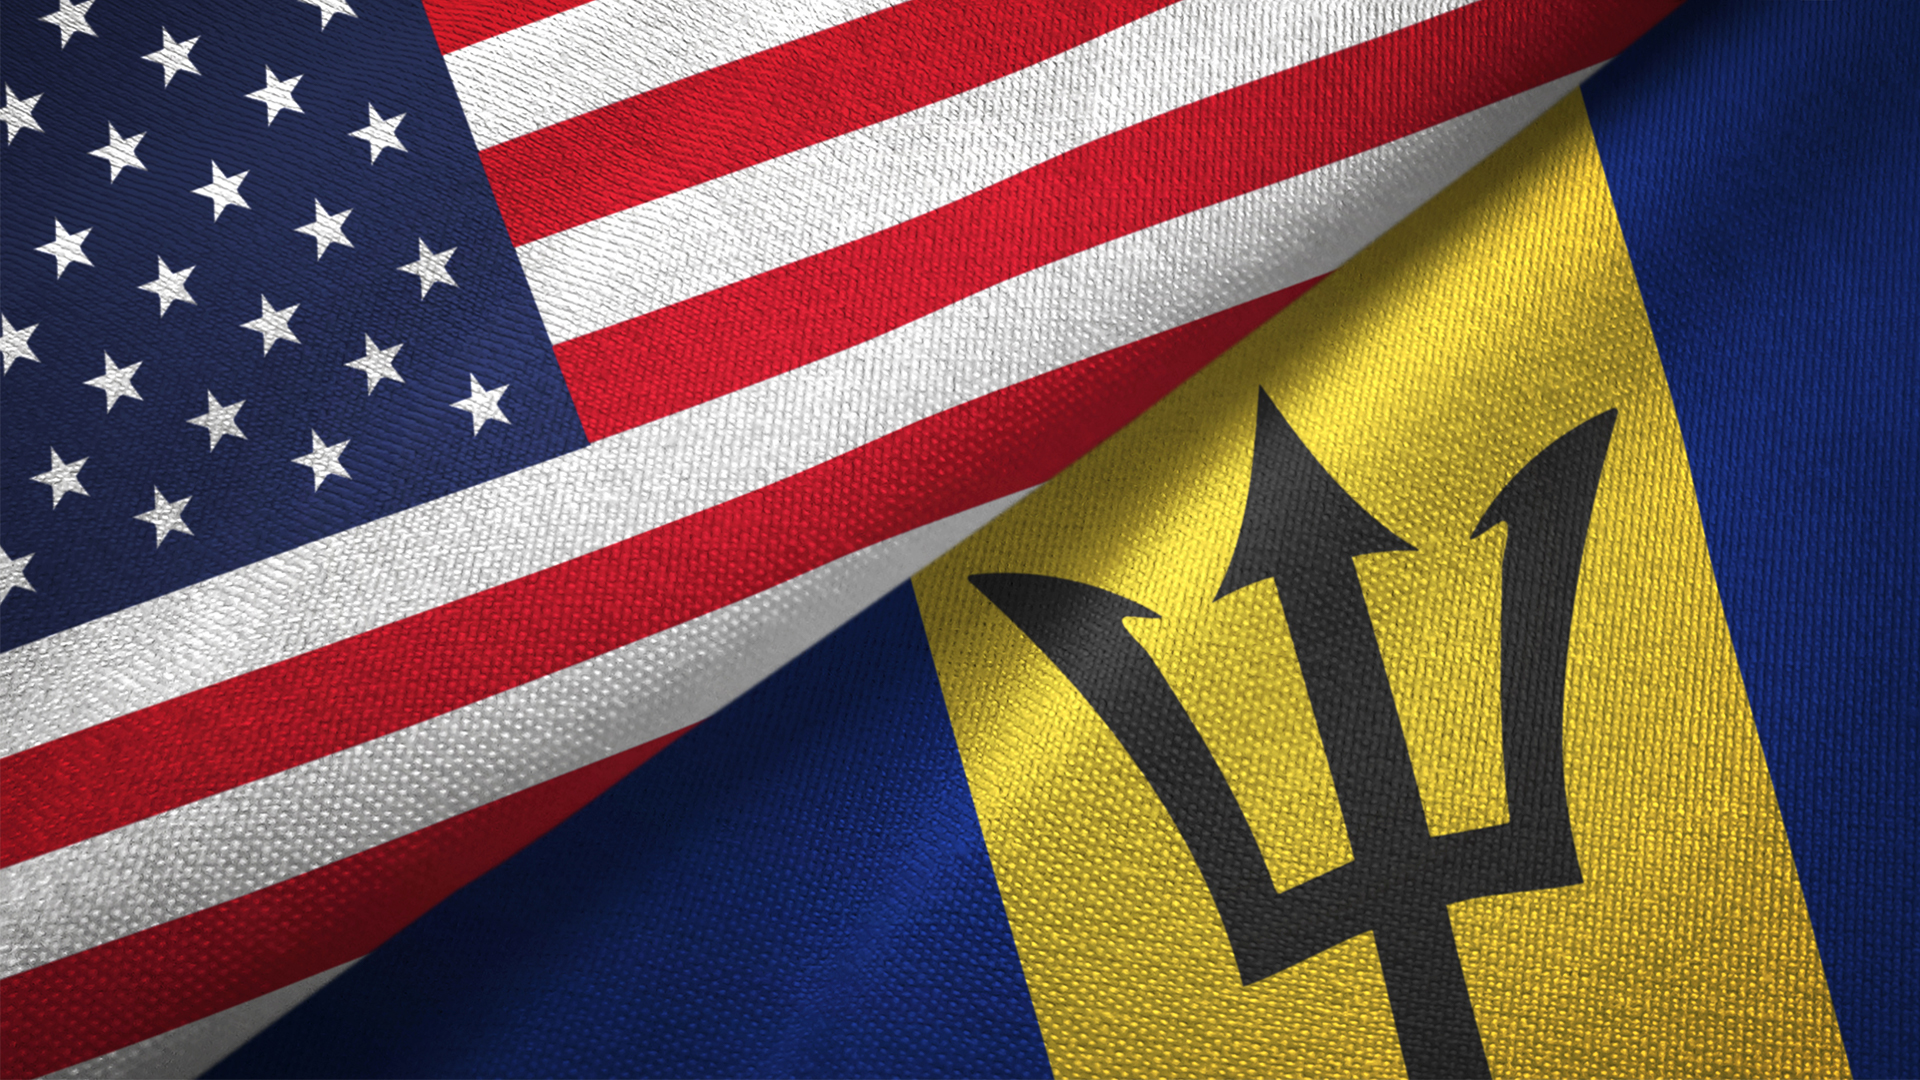 United States and Barbados two flags textile cloth, fabric texture Image